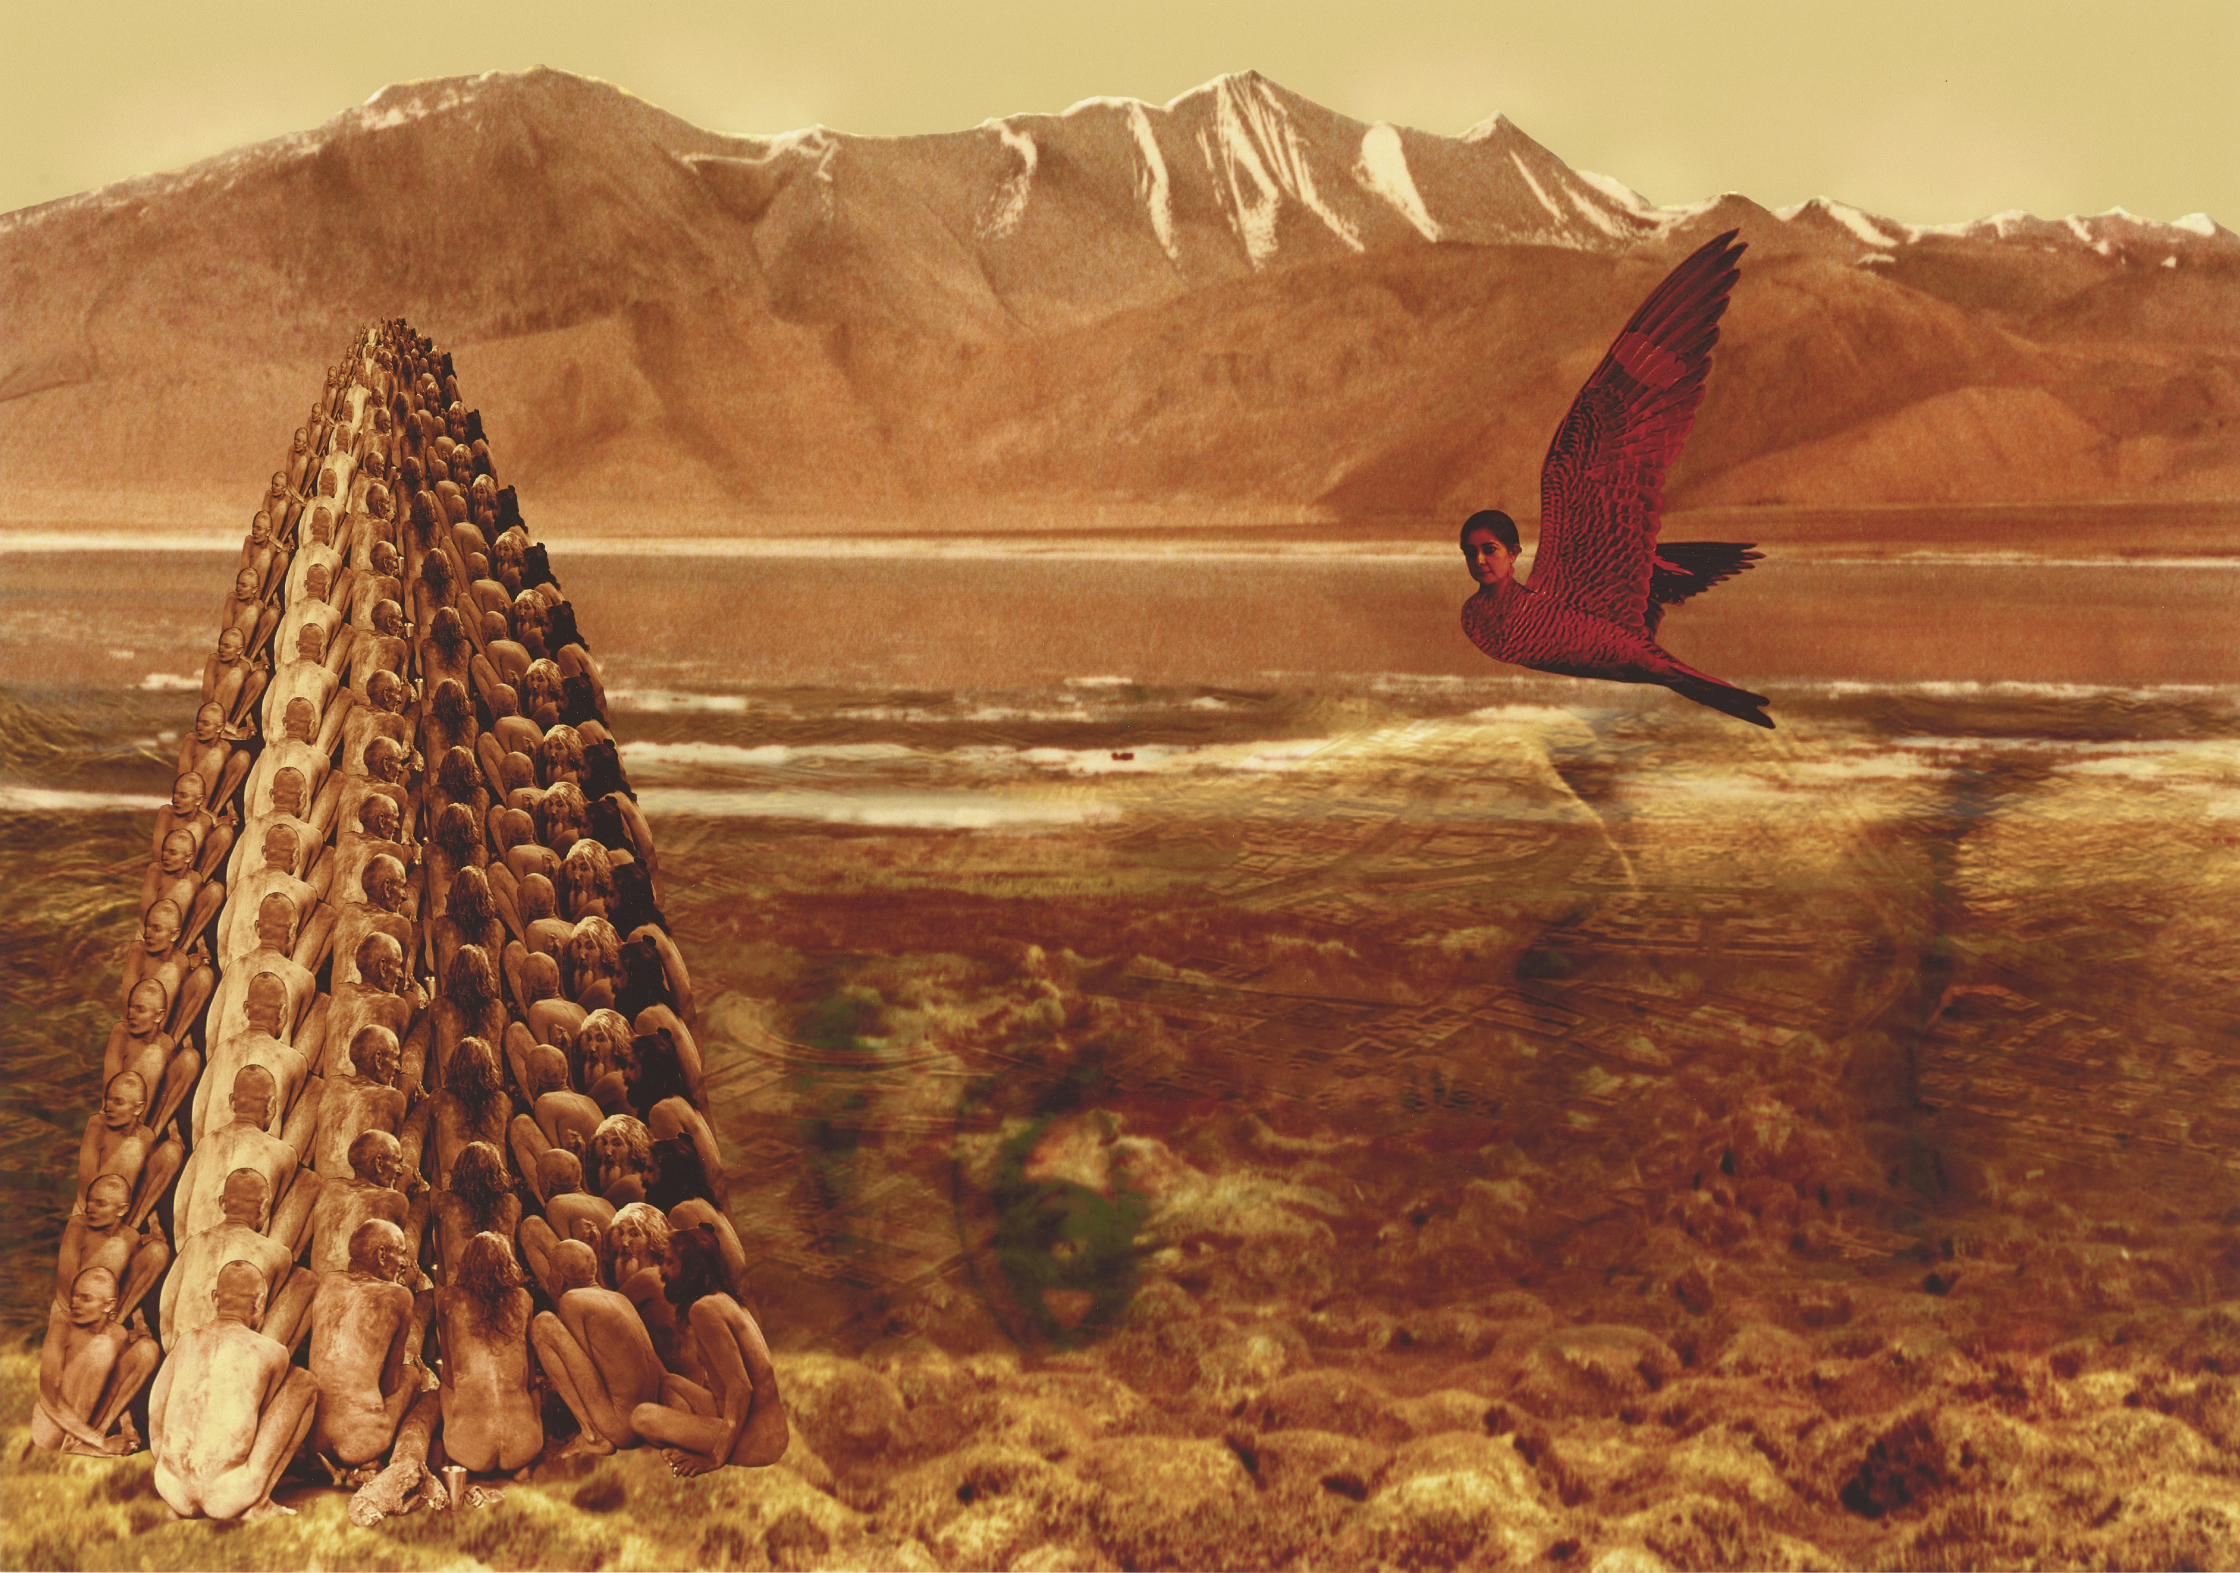 In a digitally constructed image is a rusty orange desert landscape with mountains in the background. On the left, dozens of nude figures are assembled in the formation of a tall tower. On the right is a red creature with the body of a bird and the head of a woman. In the foreground, the semitransparent image of a woman’s face is superimposed sideways across the terrain.